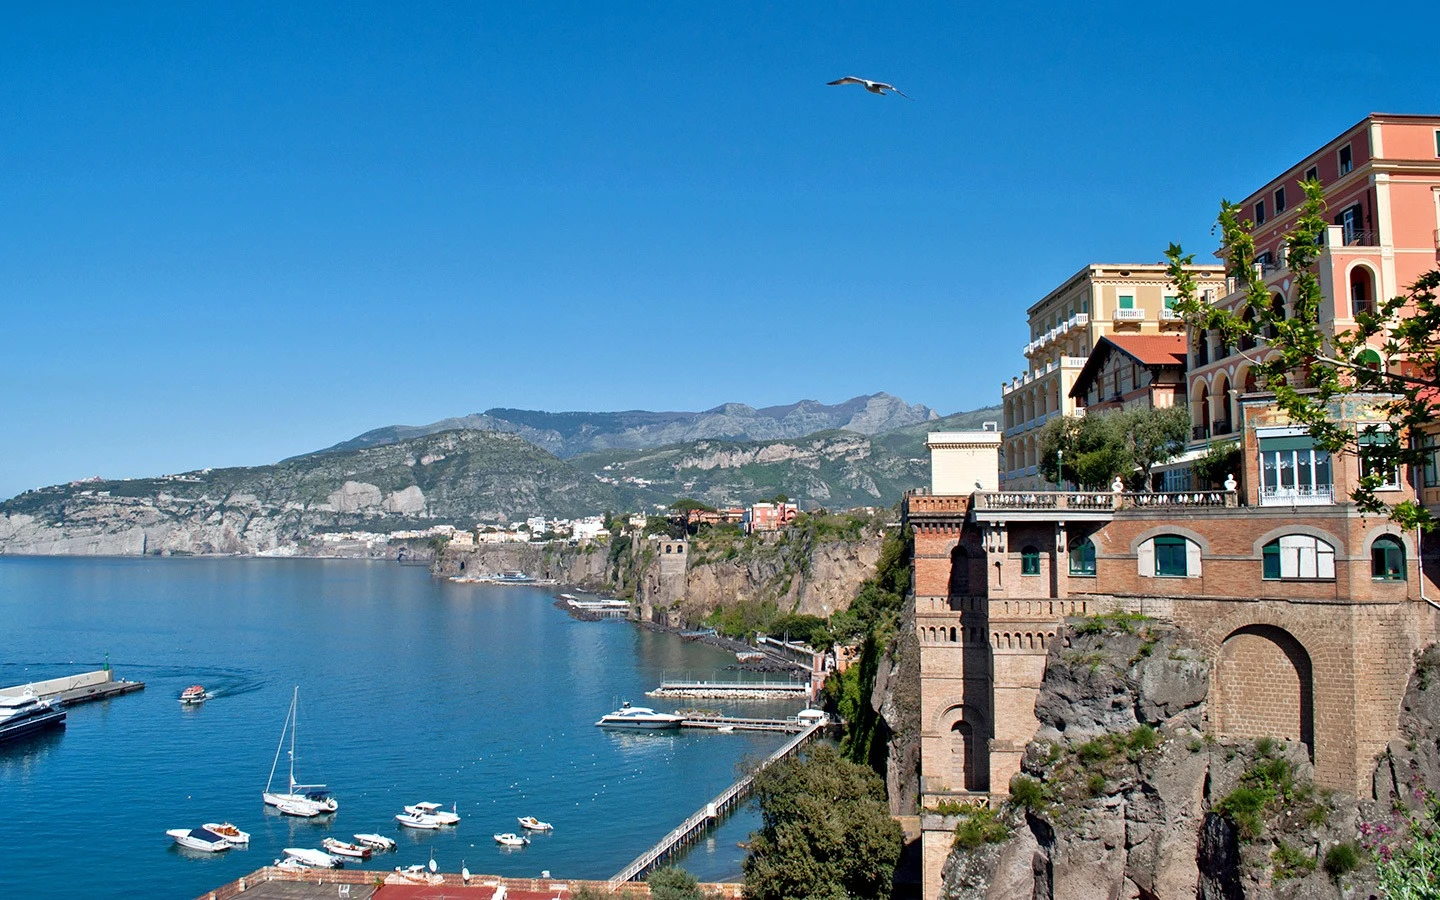 Sirens and sunsets: What to do and see in Sorrento, Italy